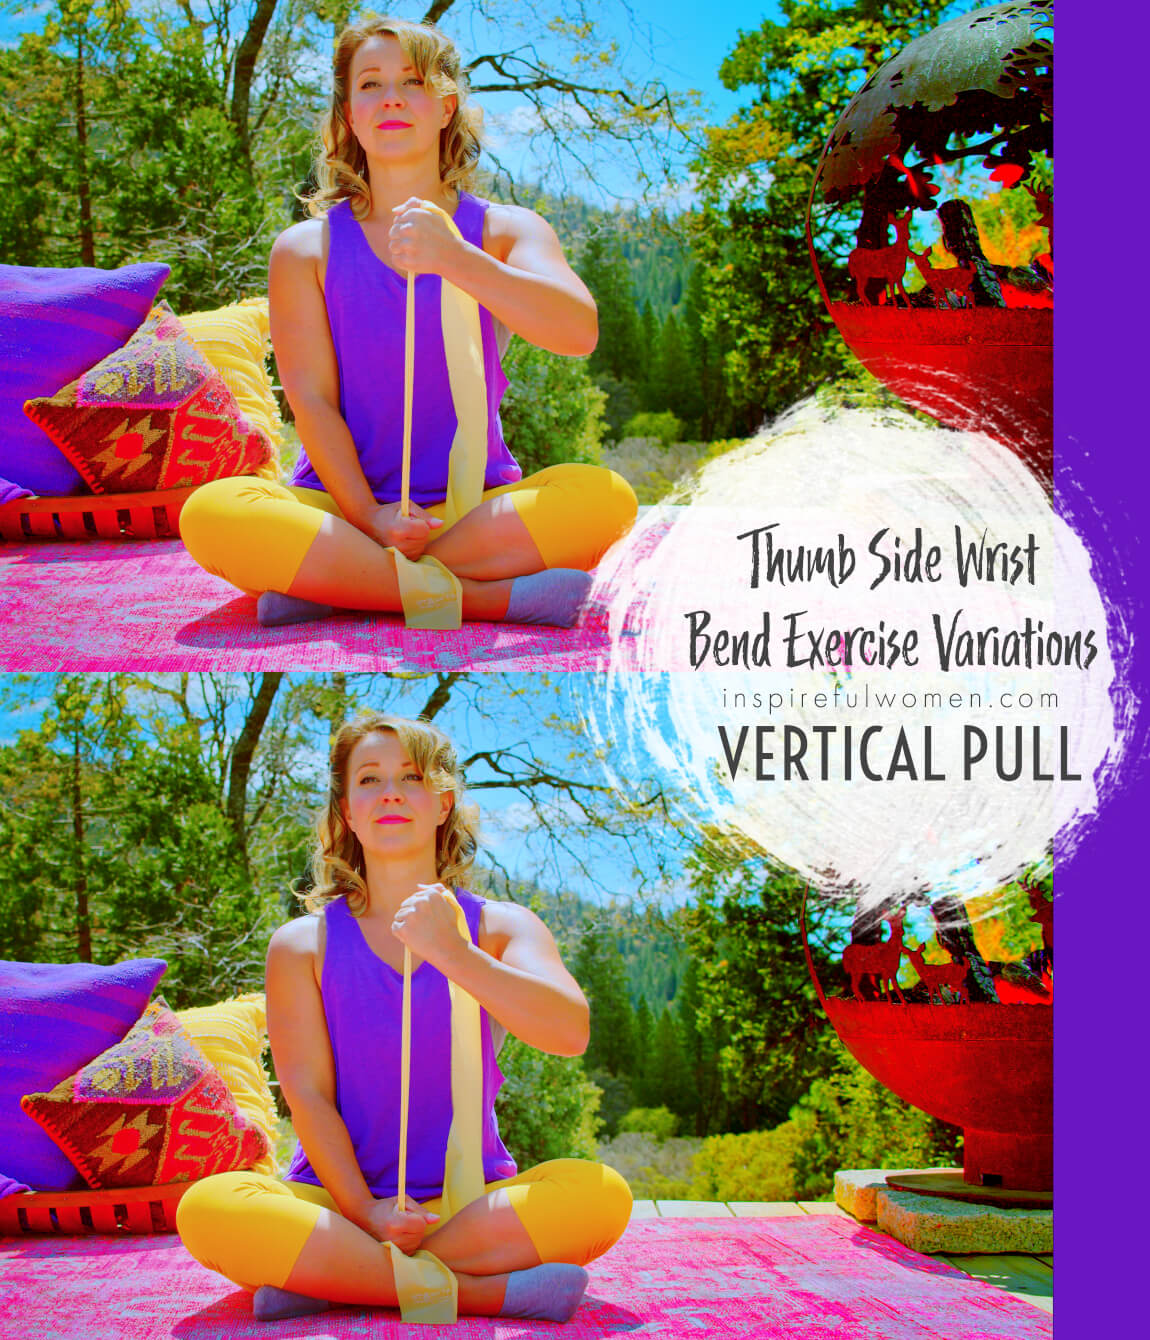 vertical-pull-thumb-side-wrist-bend-exercise-variation